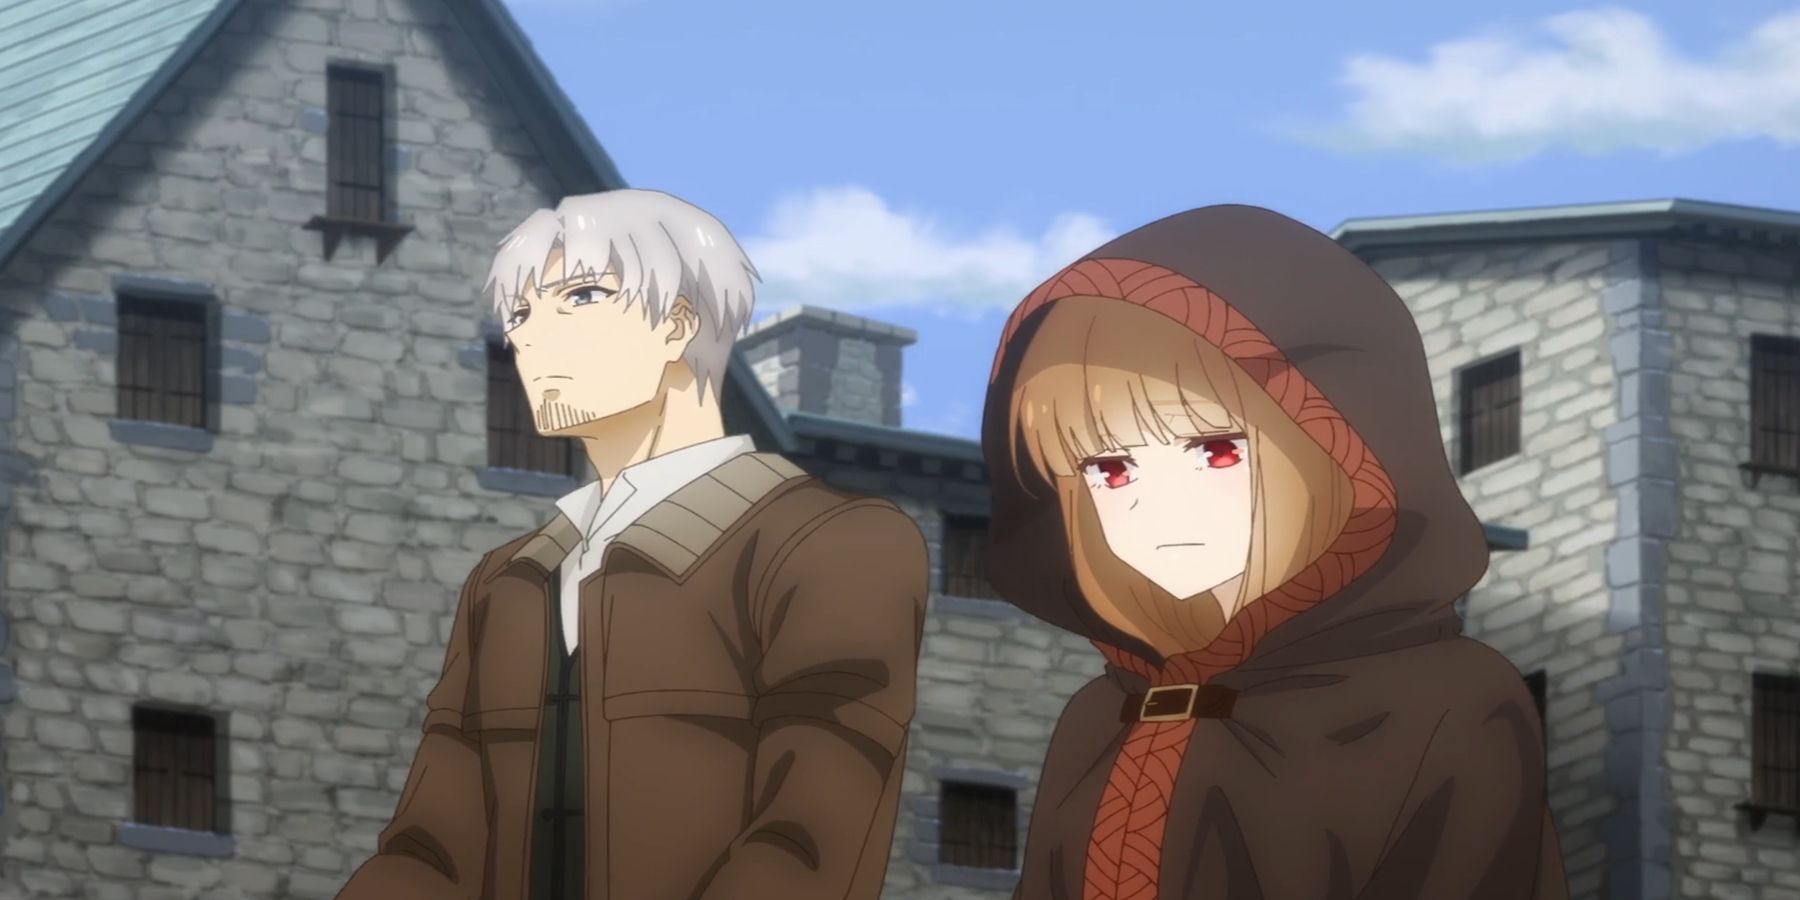 Kraft and Holo From Spice and Wolf